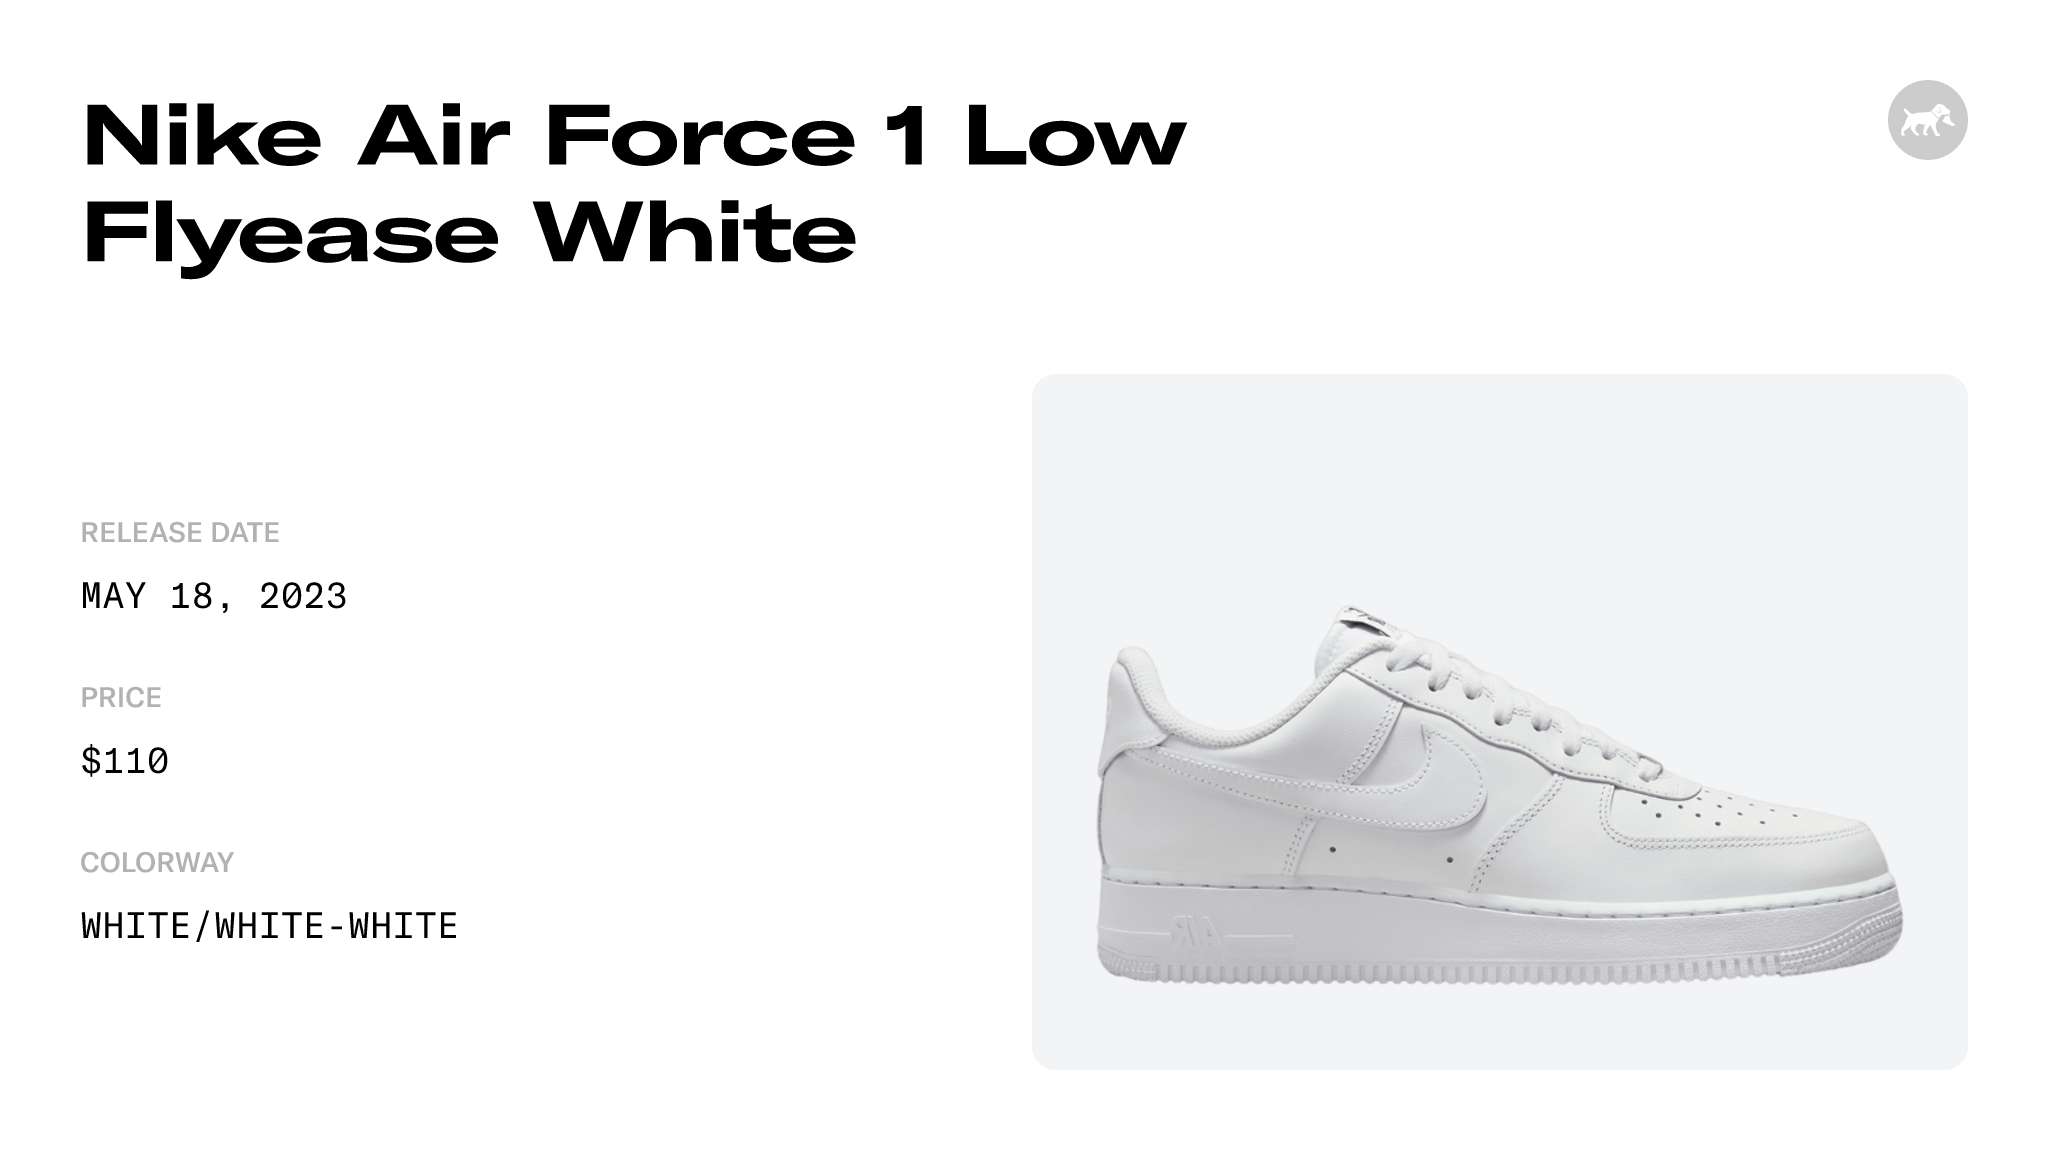 Nike Air Force 1 Low Flyease White - FD1146-100 Raffles and 